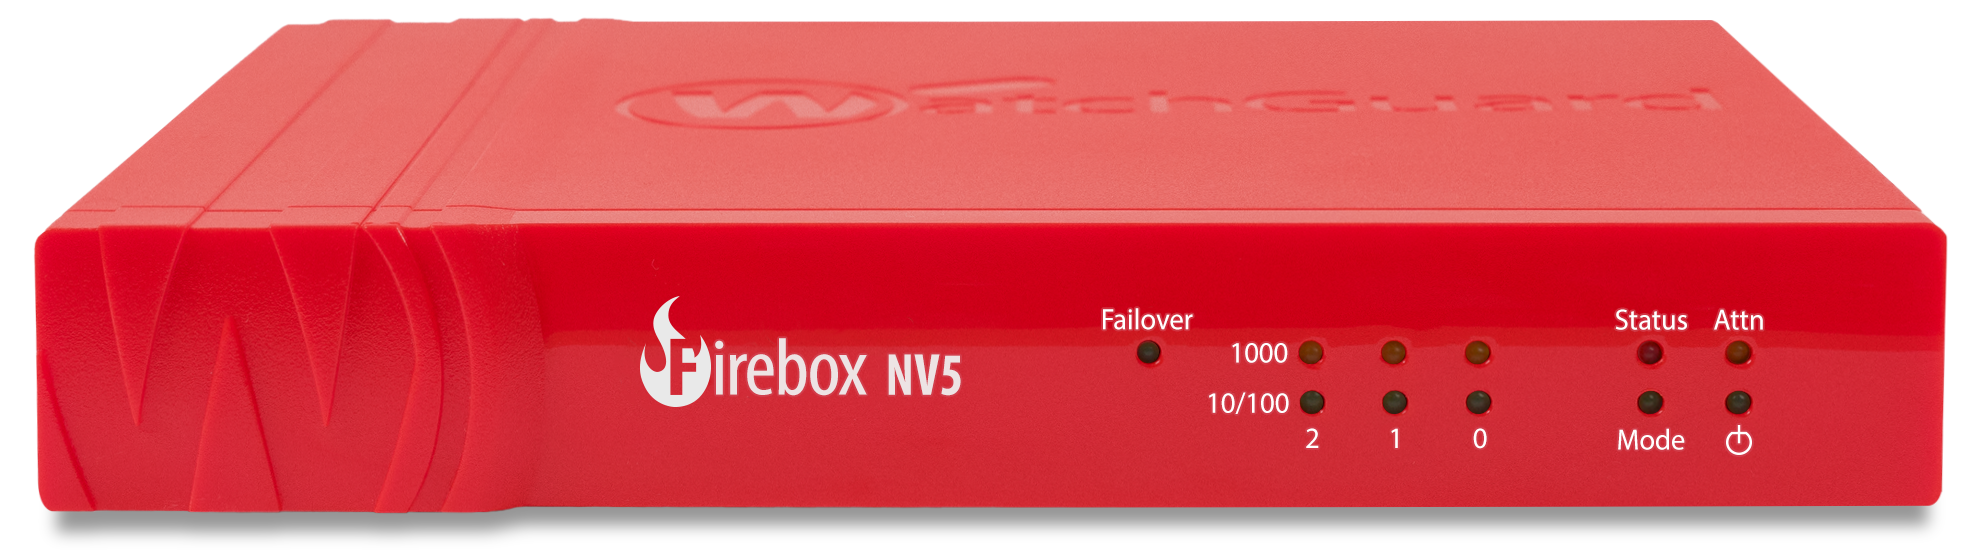 Front view of the Firebox NV5